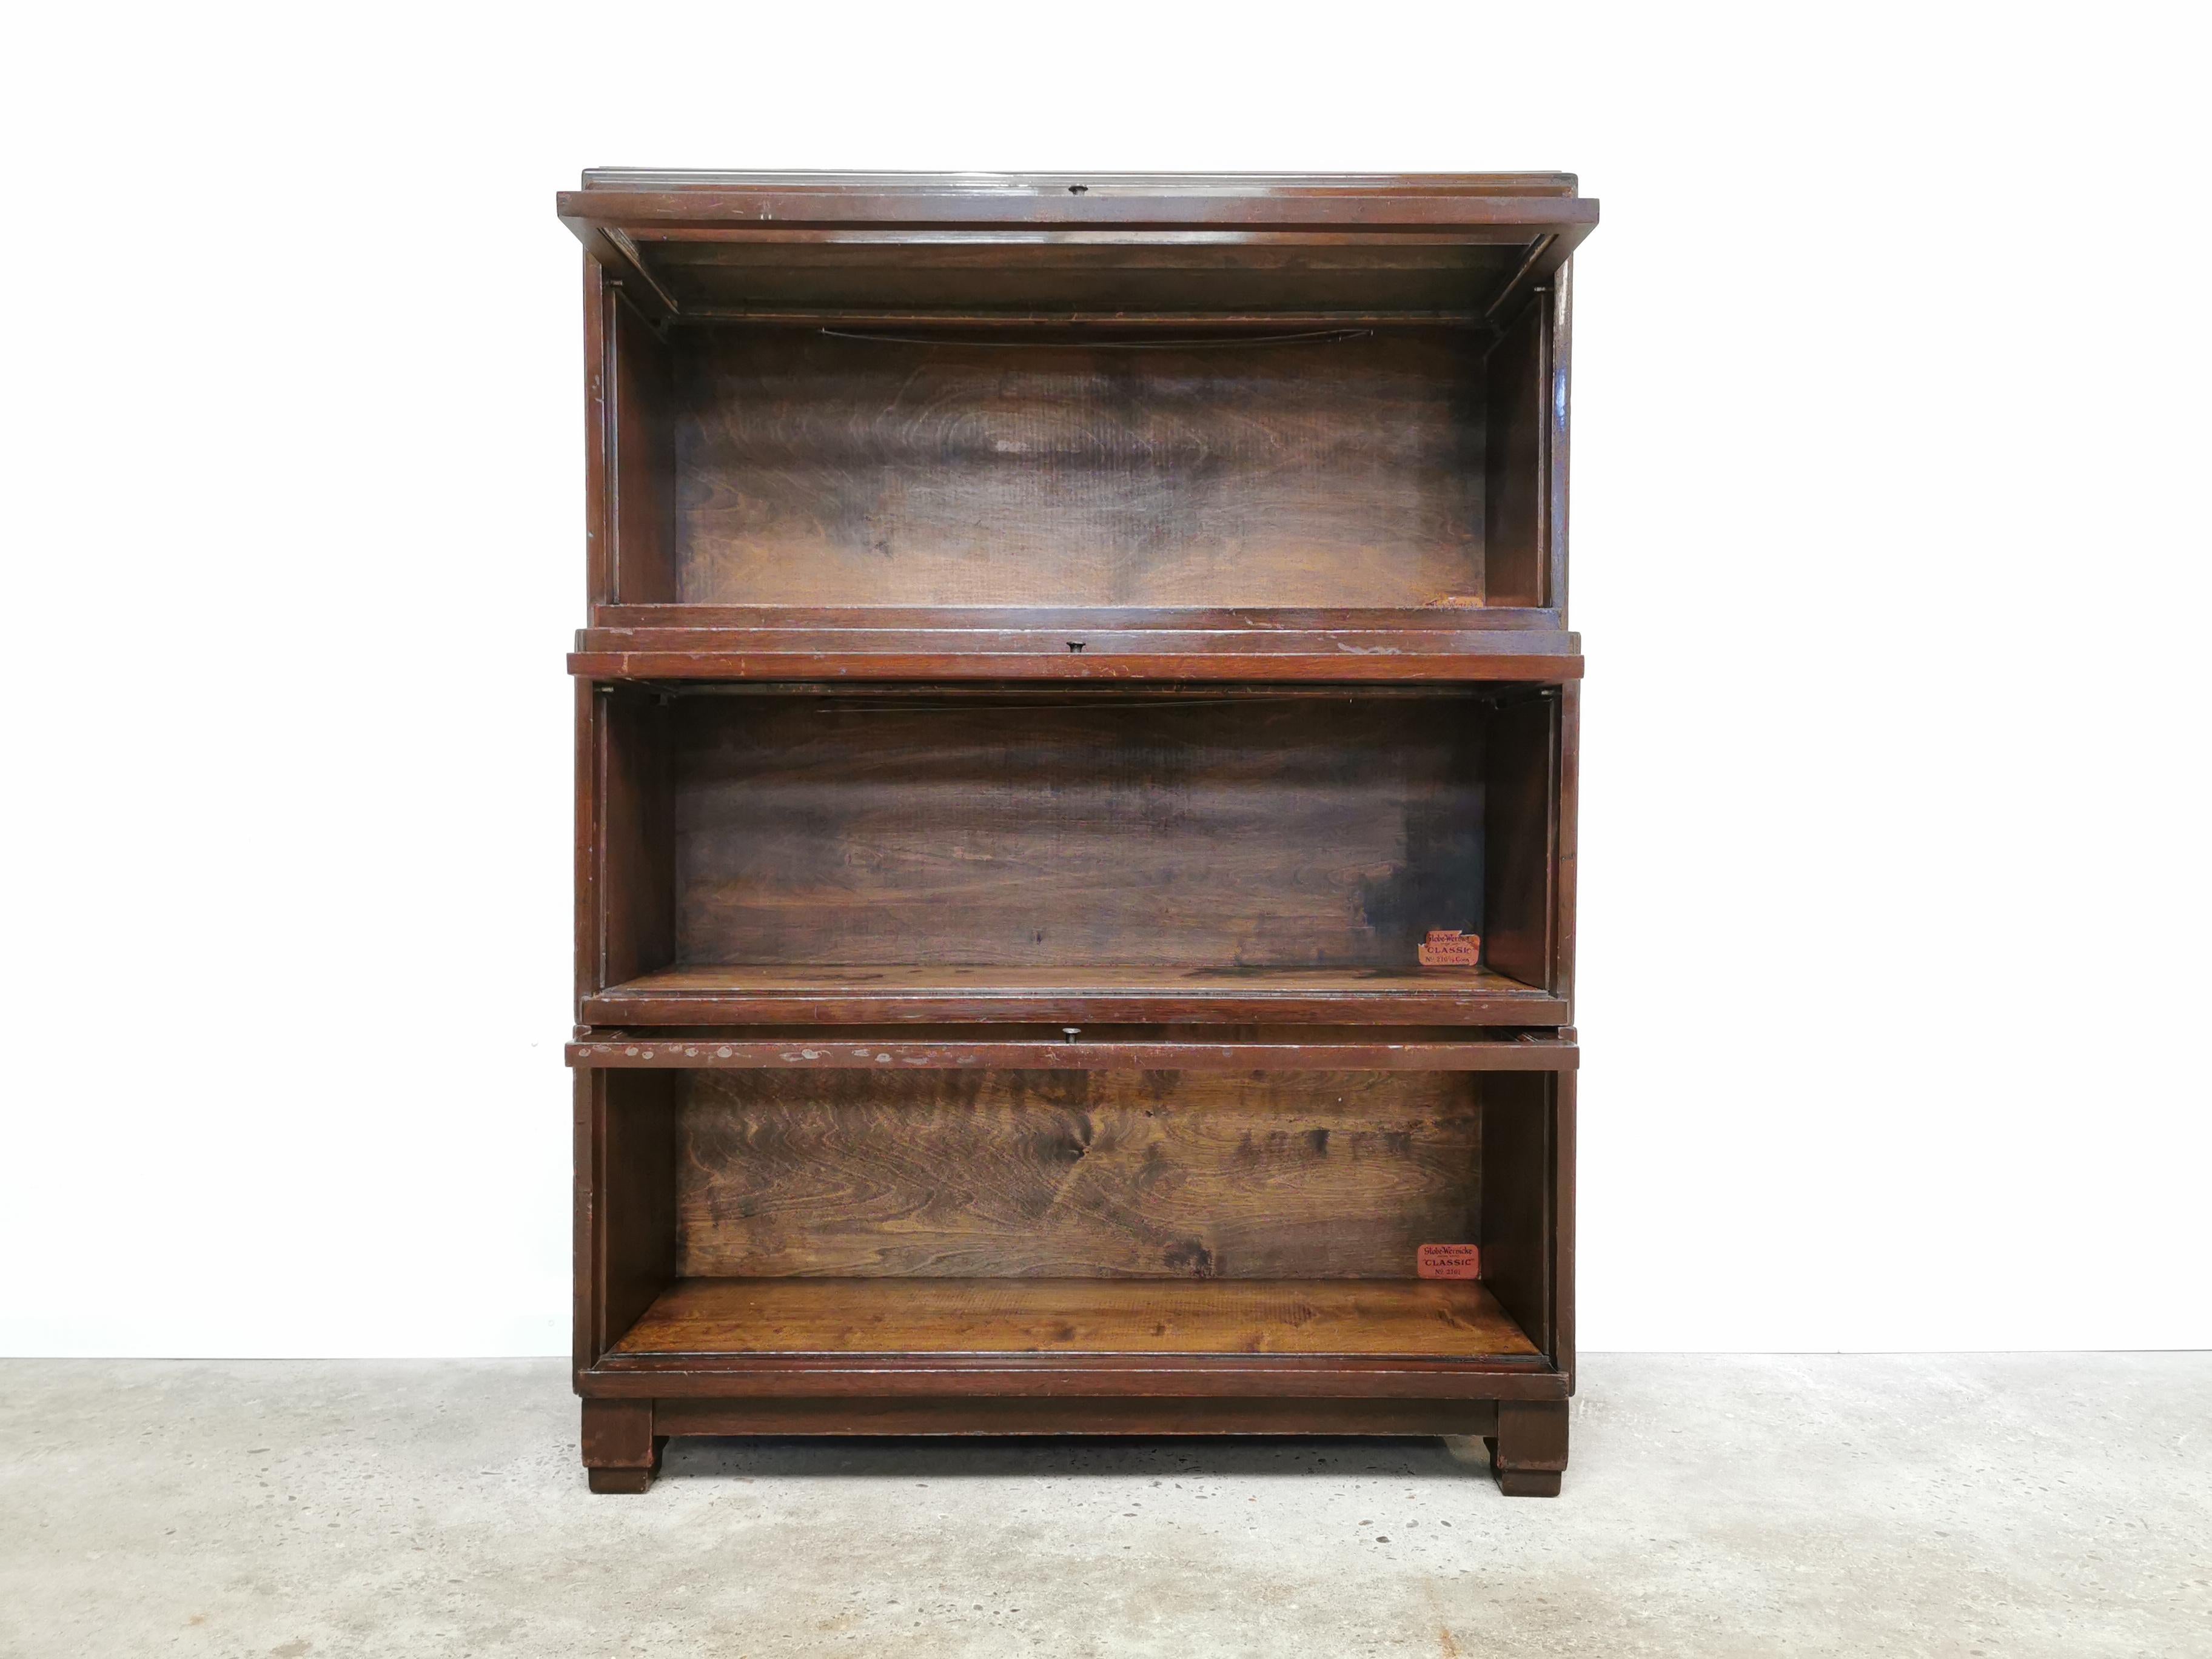 The Globe Wernicke bookcase system was produced in England, America, and Germany. The mobile office was popular among researchers who took the furniture on their travels. Typical for the Globe-Wernicke bookcases are the patented retractable glass